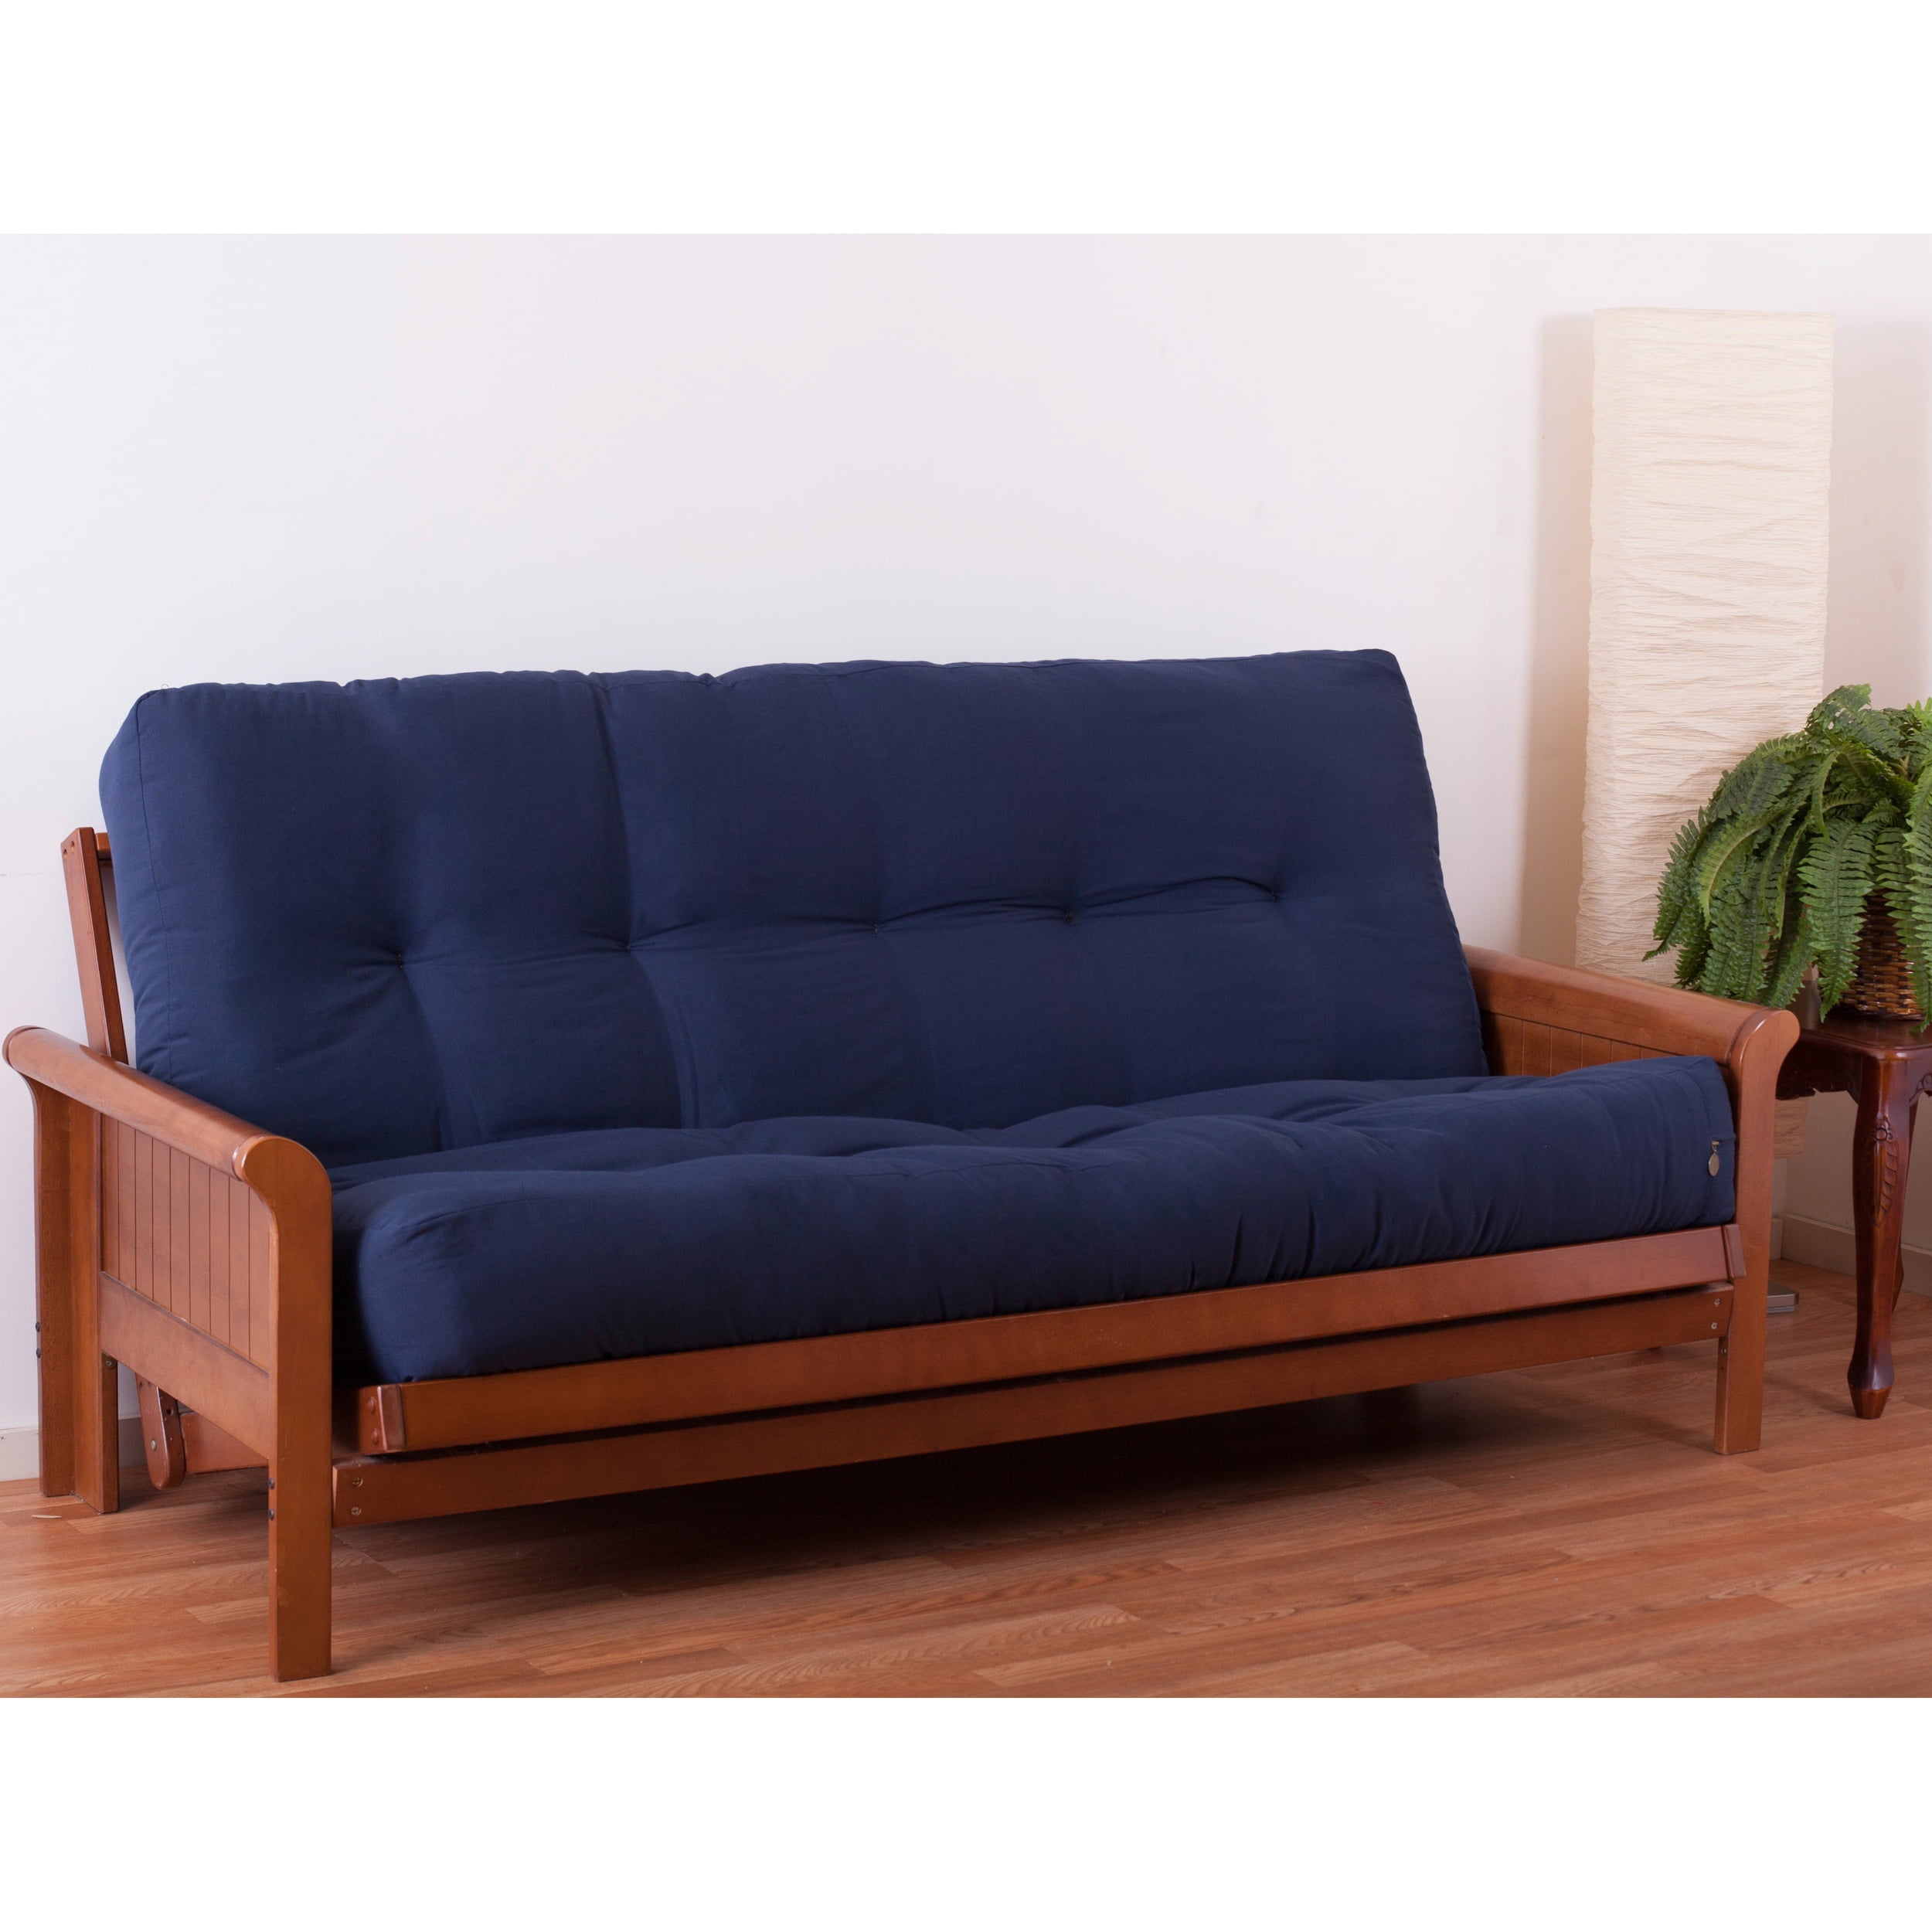 Picture of Blazing Needles 9608-TW-NV 10 in. Renewal Twill Full Size Futon Mattress, Navy